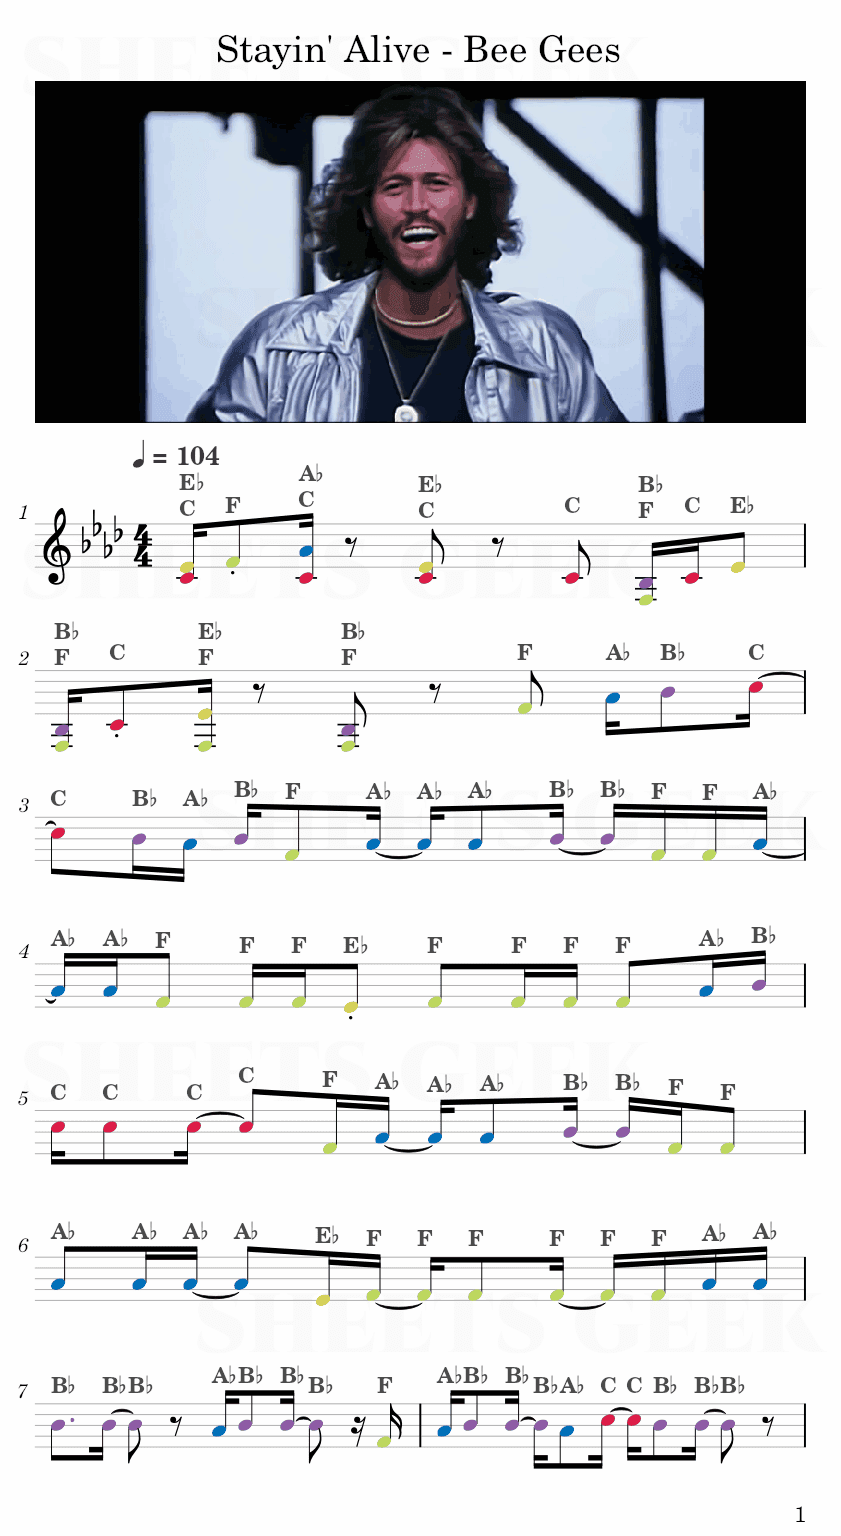 Stayin' Alive - Bee Gees Easy Sheet Music Free for piano, keyboard, flute, violin, sax, cello page 1